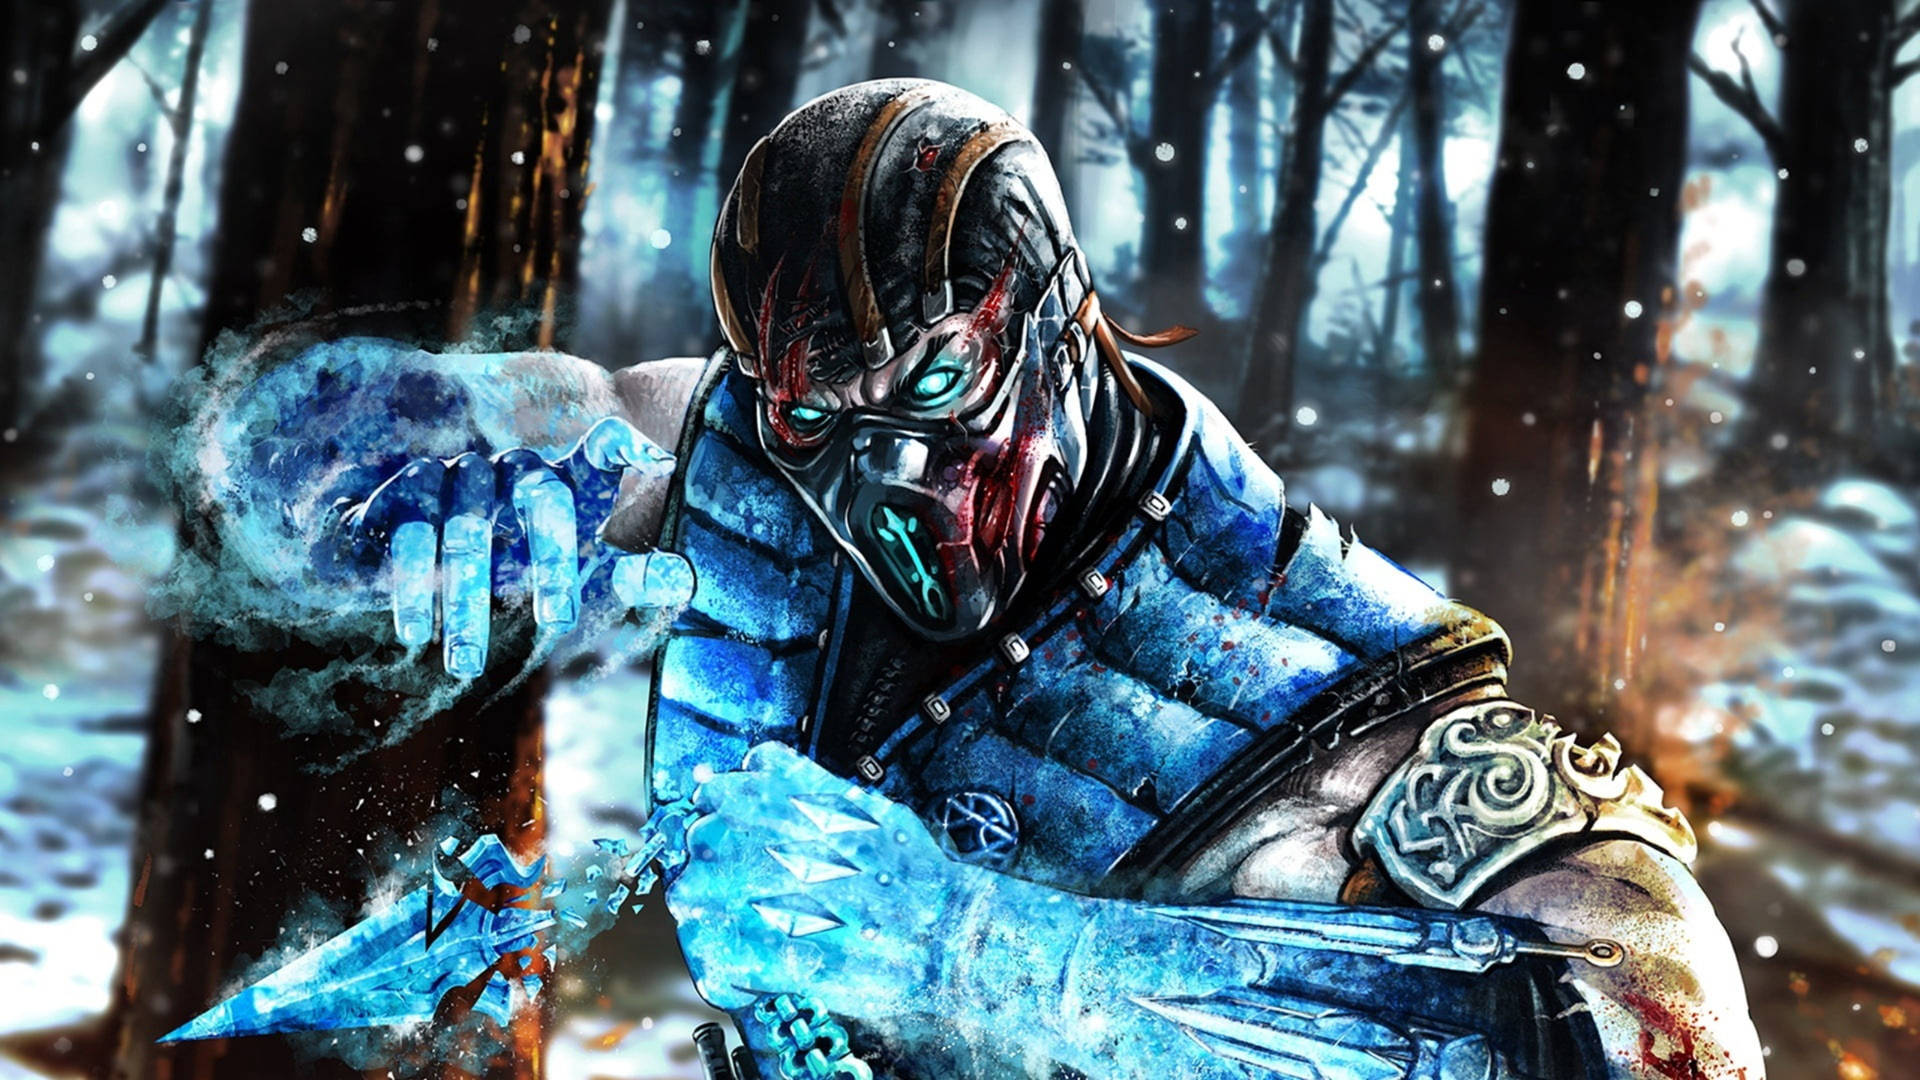 Bloody Sub-zero In Forest Background